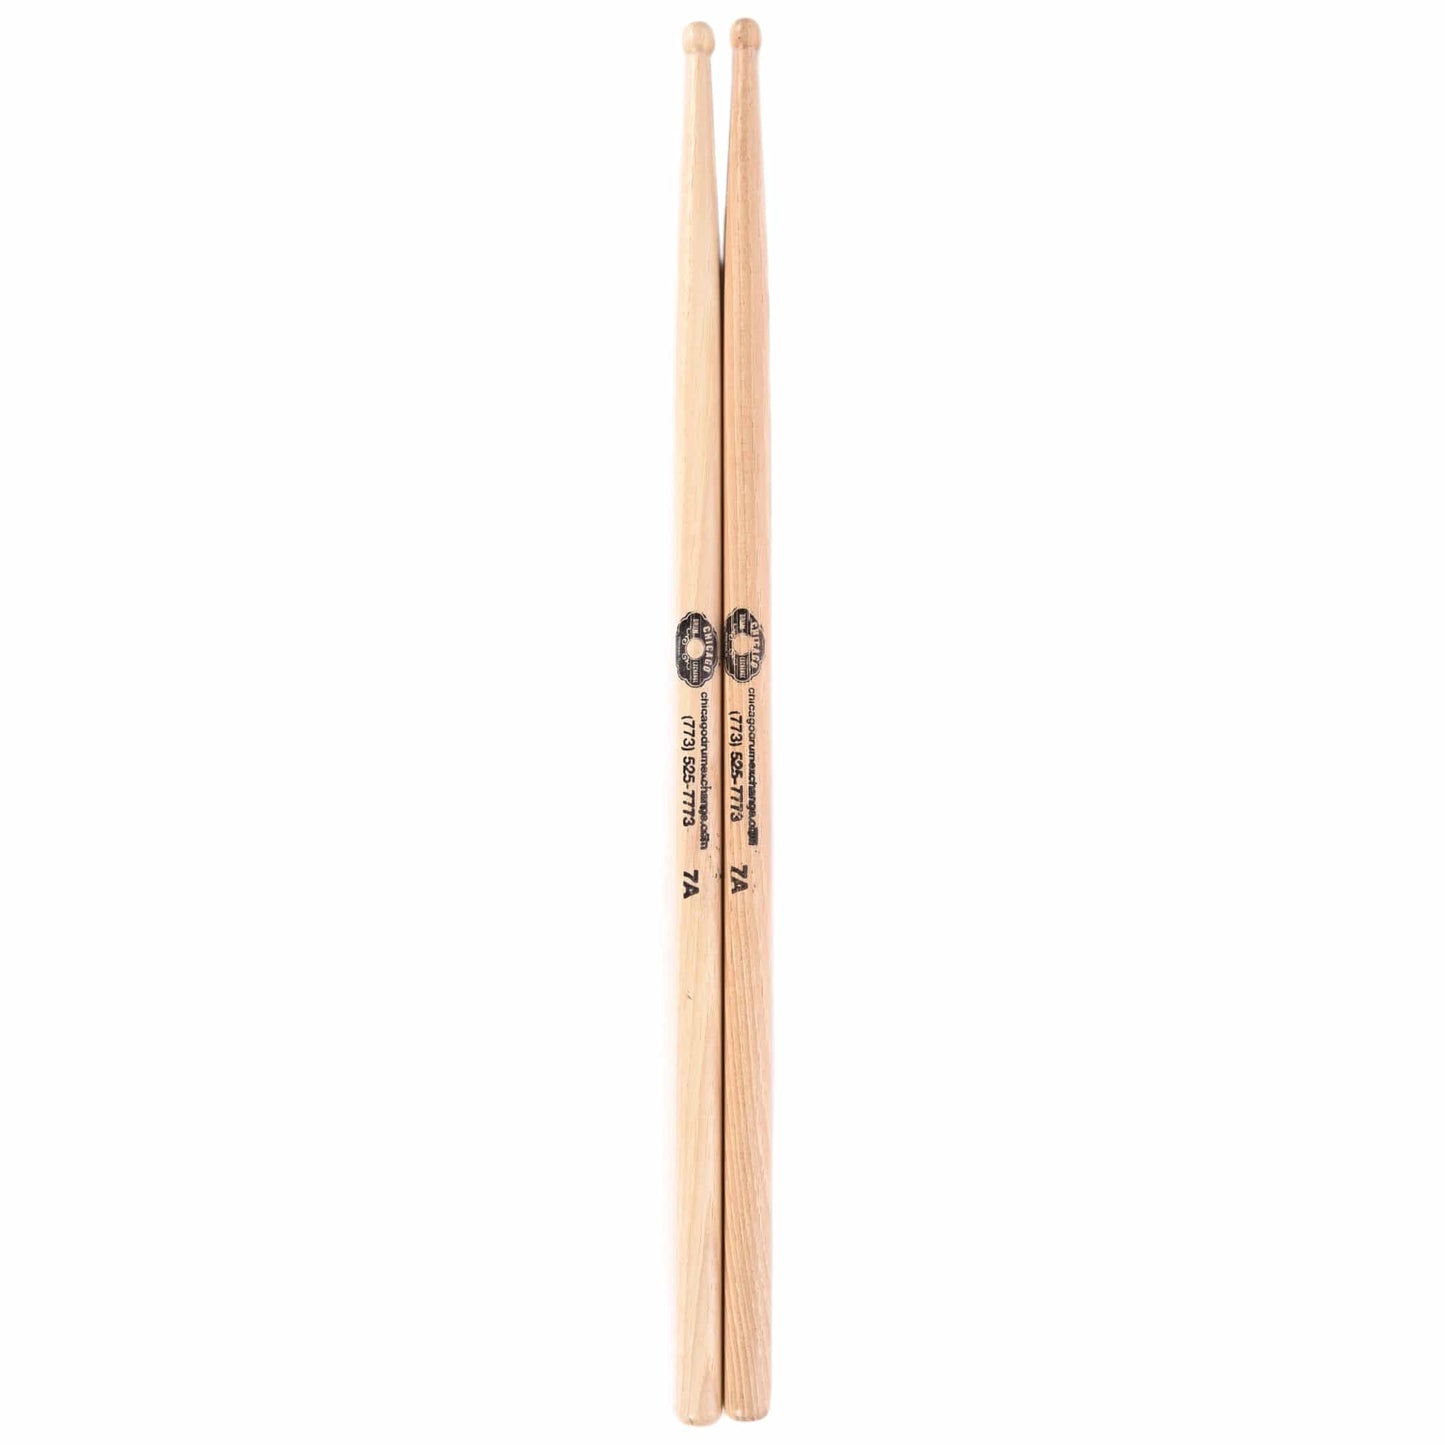 Chicago Drum Exchange CDE 7A Vater 2nd Quality Wood Tip Custom Imprint Drum Sticks (12 Pair Bundle) Drums and Percussion / Parts and Accessories / Drum Sticks and Mallets